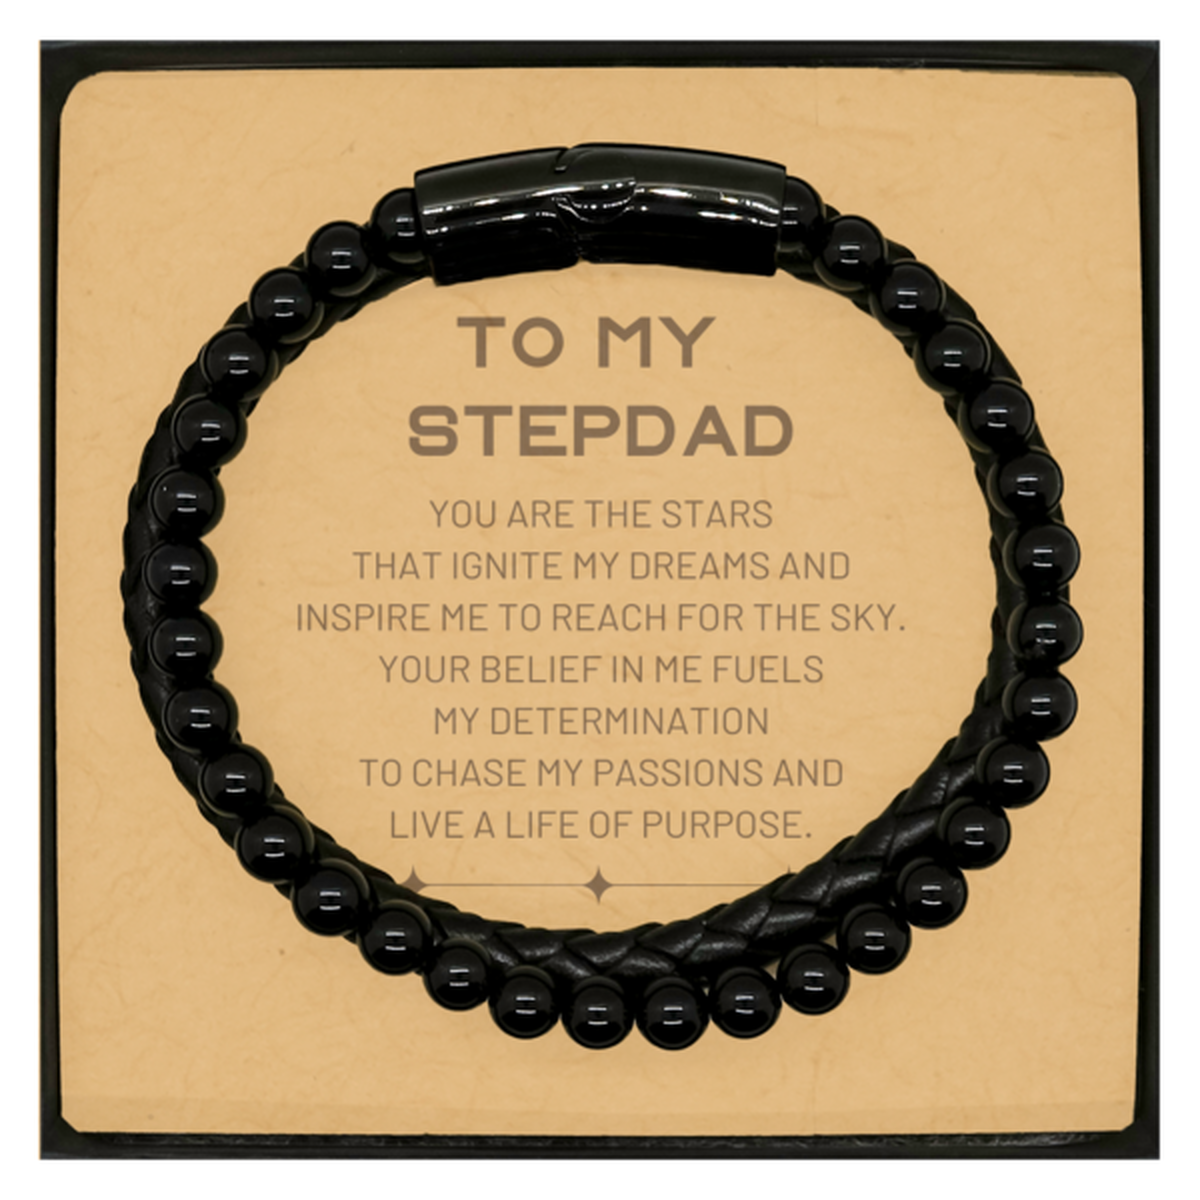 To My Stepdad Stone Leather Bracelets, You are the stars that ignite my dreams and inspire me to reach for the sky, Birthday Christmas Unique Gifts For Stepdad, Thank You Gifts For Stepdad